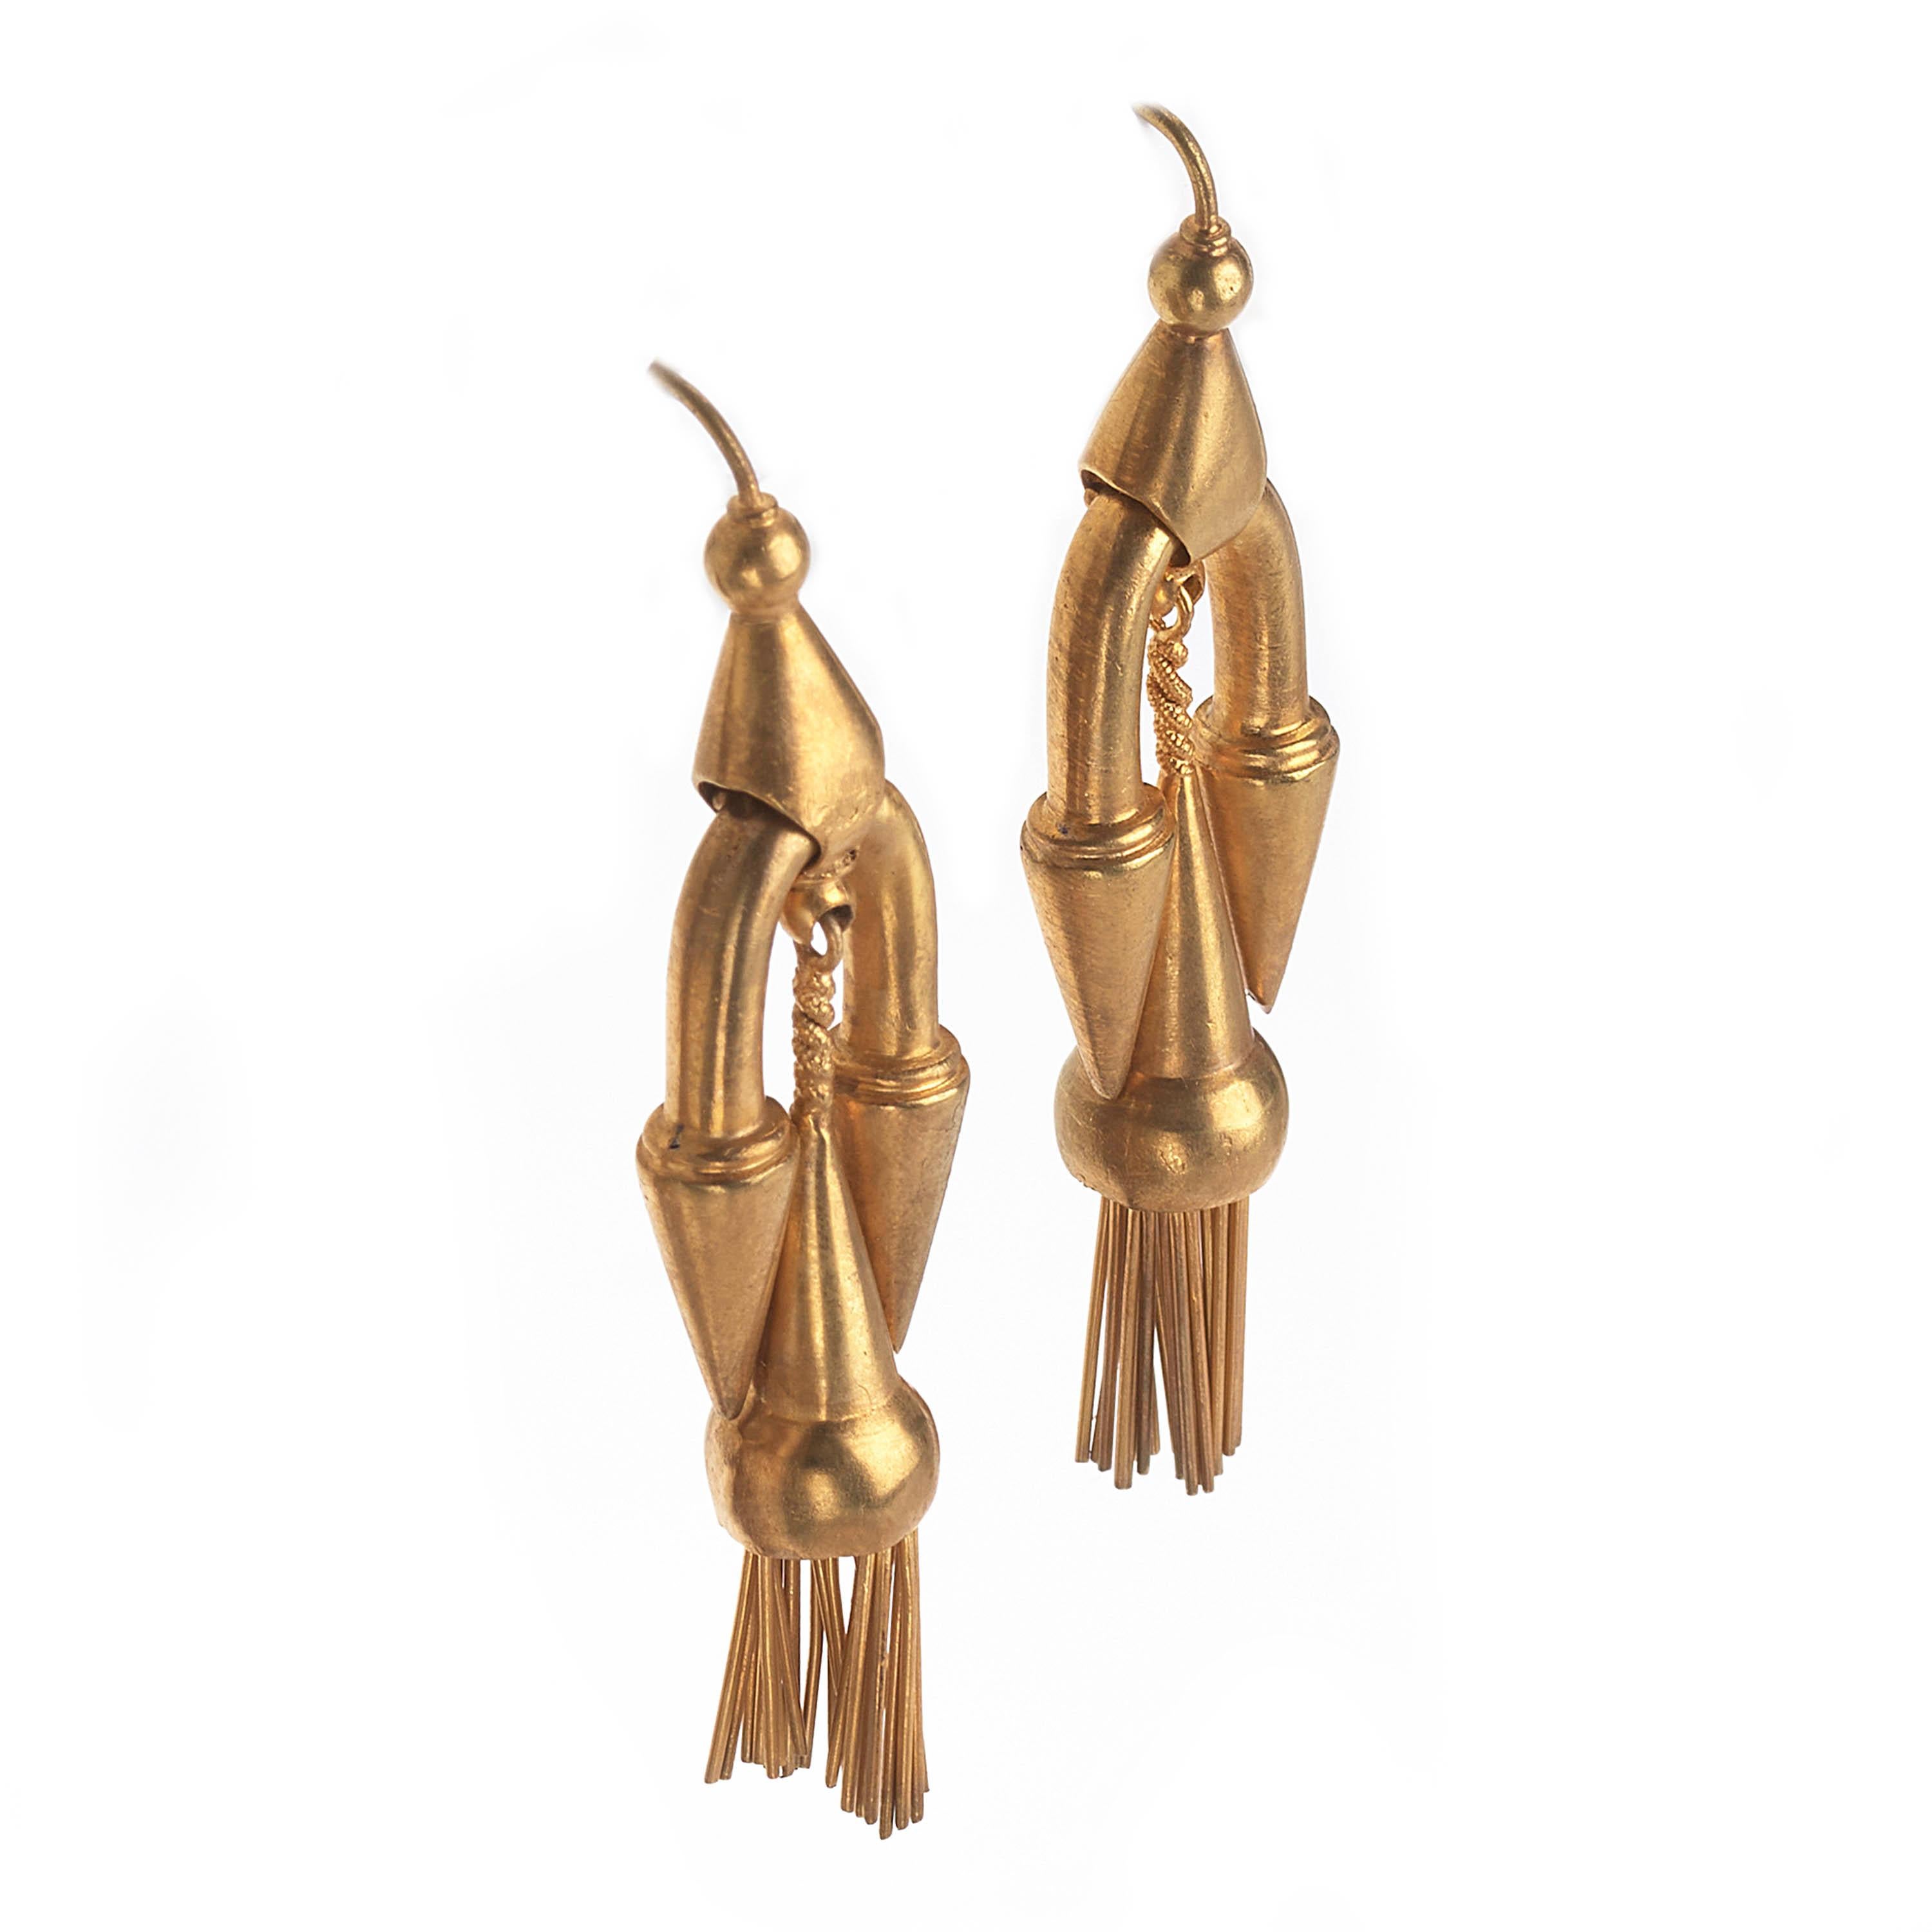 A pair of Victorian drop earrings, made in the Etruscan style, consisting of a long pendant drop, with fringed tassels, suspended by a spiked curve, with hook fittings, all in yellow gold. English, late 19th century.